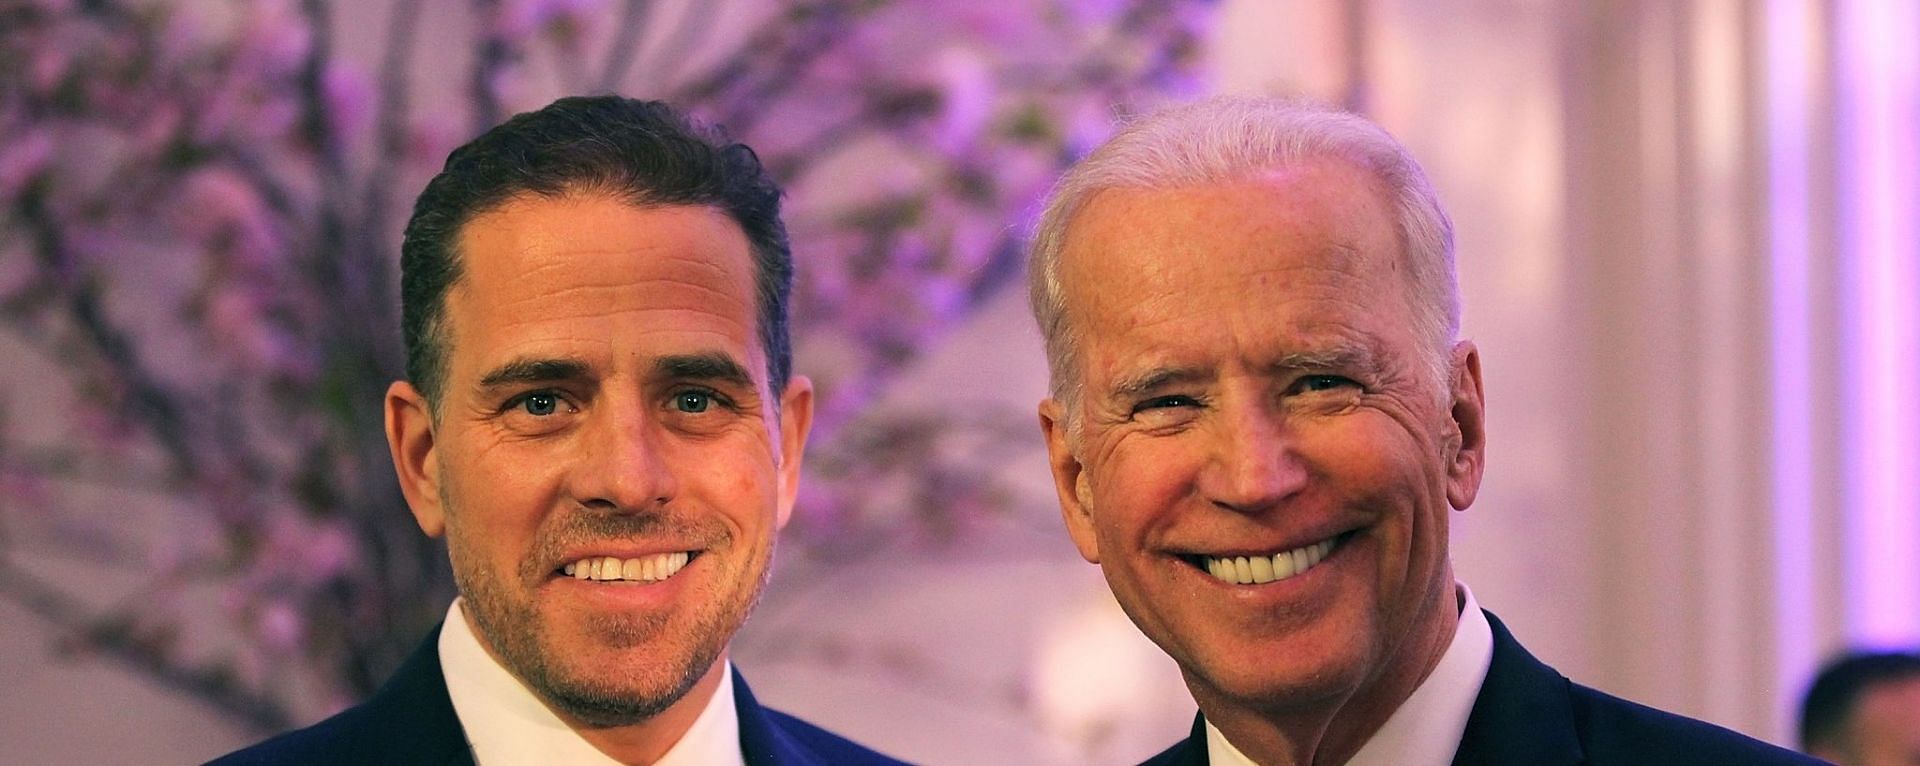 Hunter Biden got embroiled in Ukrainian controversy since the discovery of his laptop (Image via Teresa Kroeger/Getty Images)